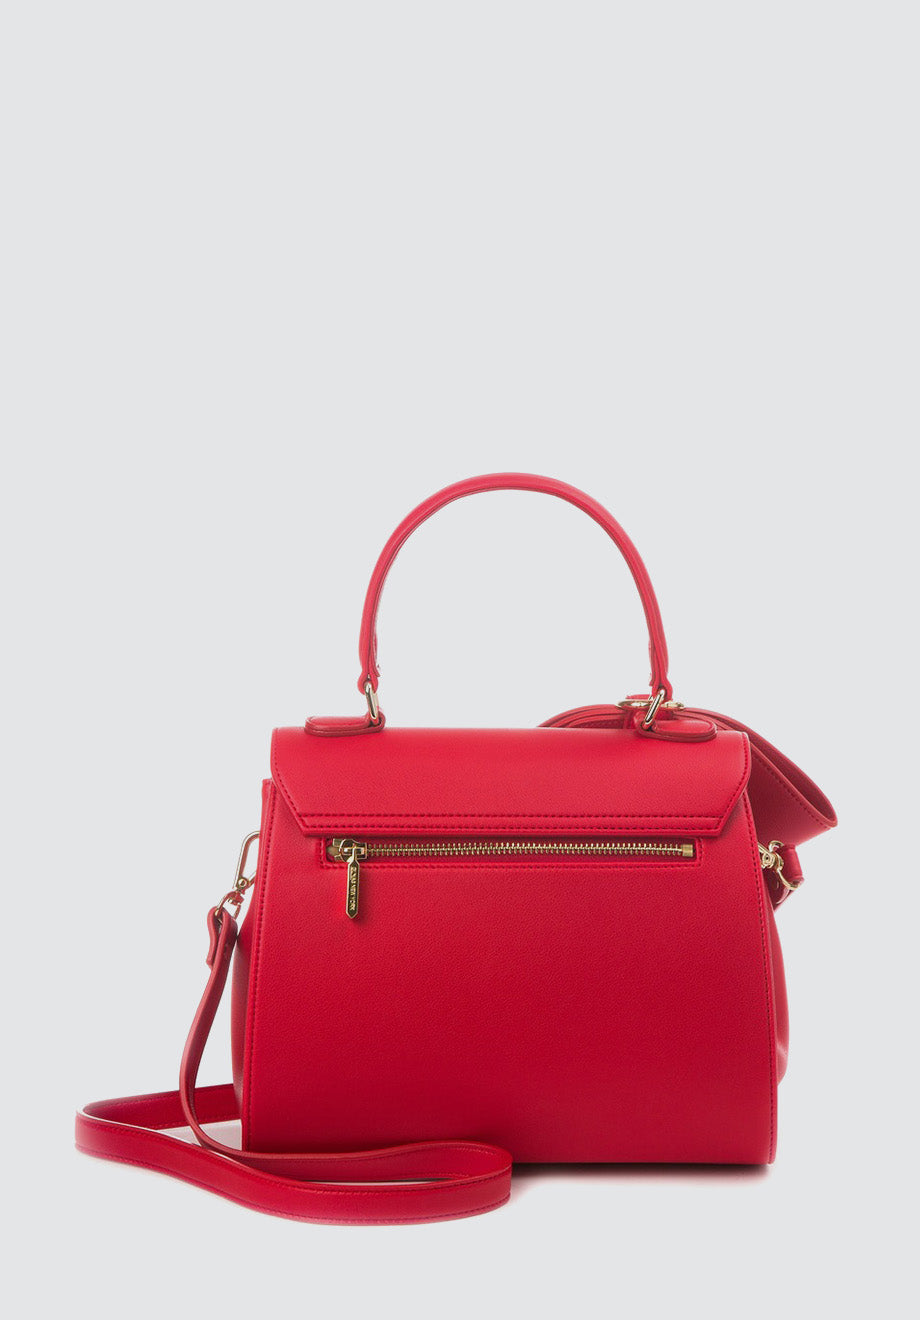 Cottontail | Red Vegan Leather Bag